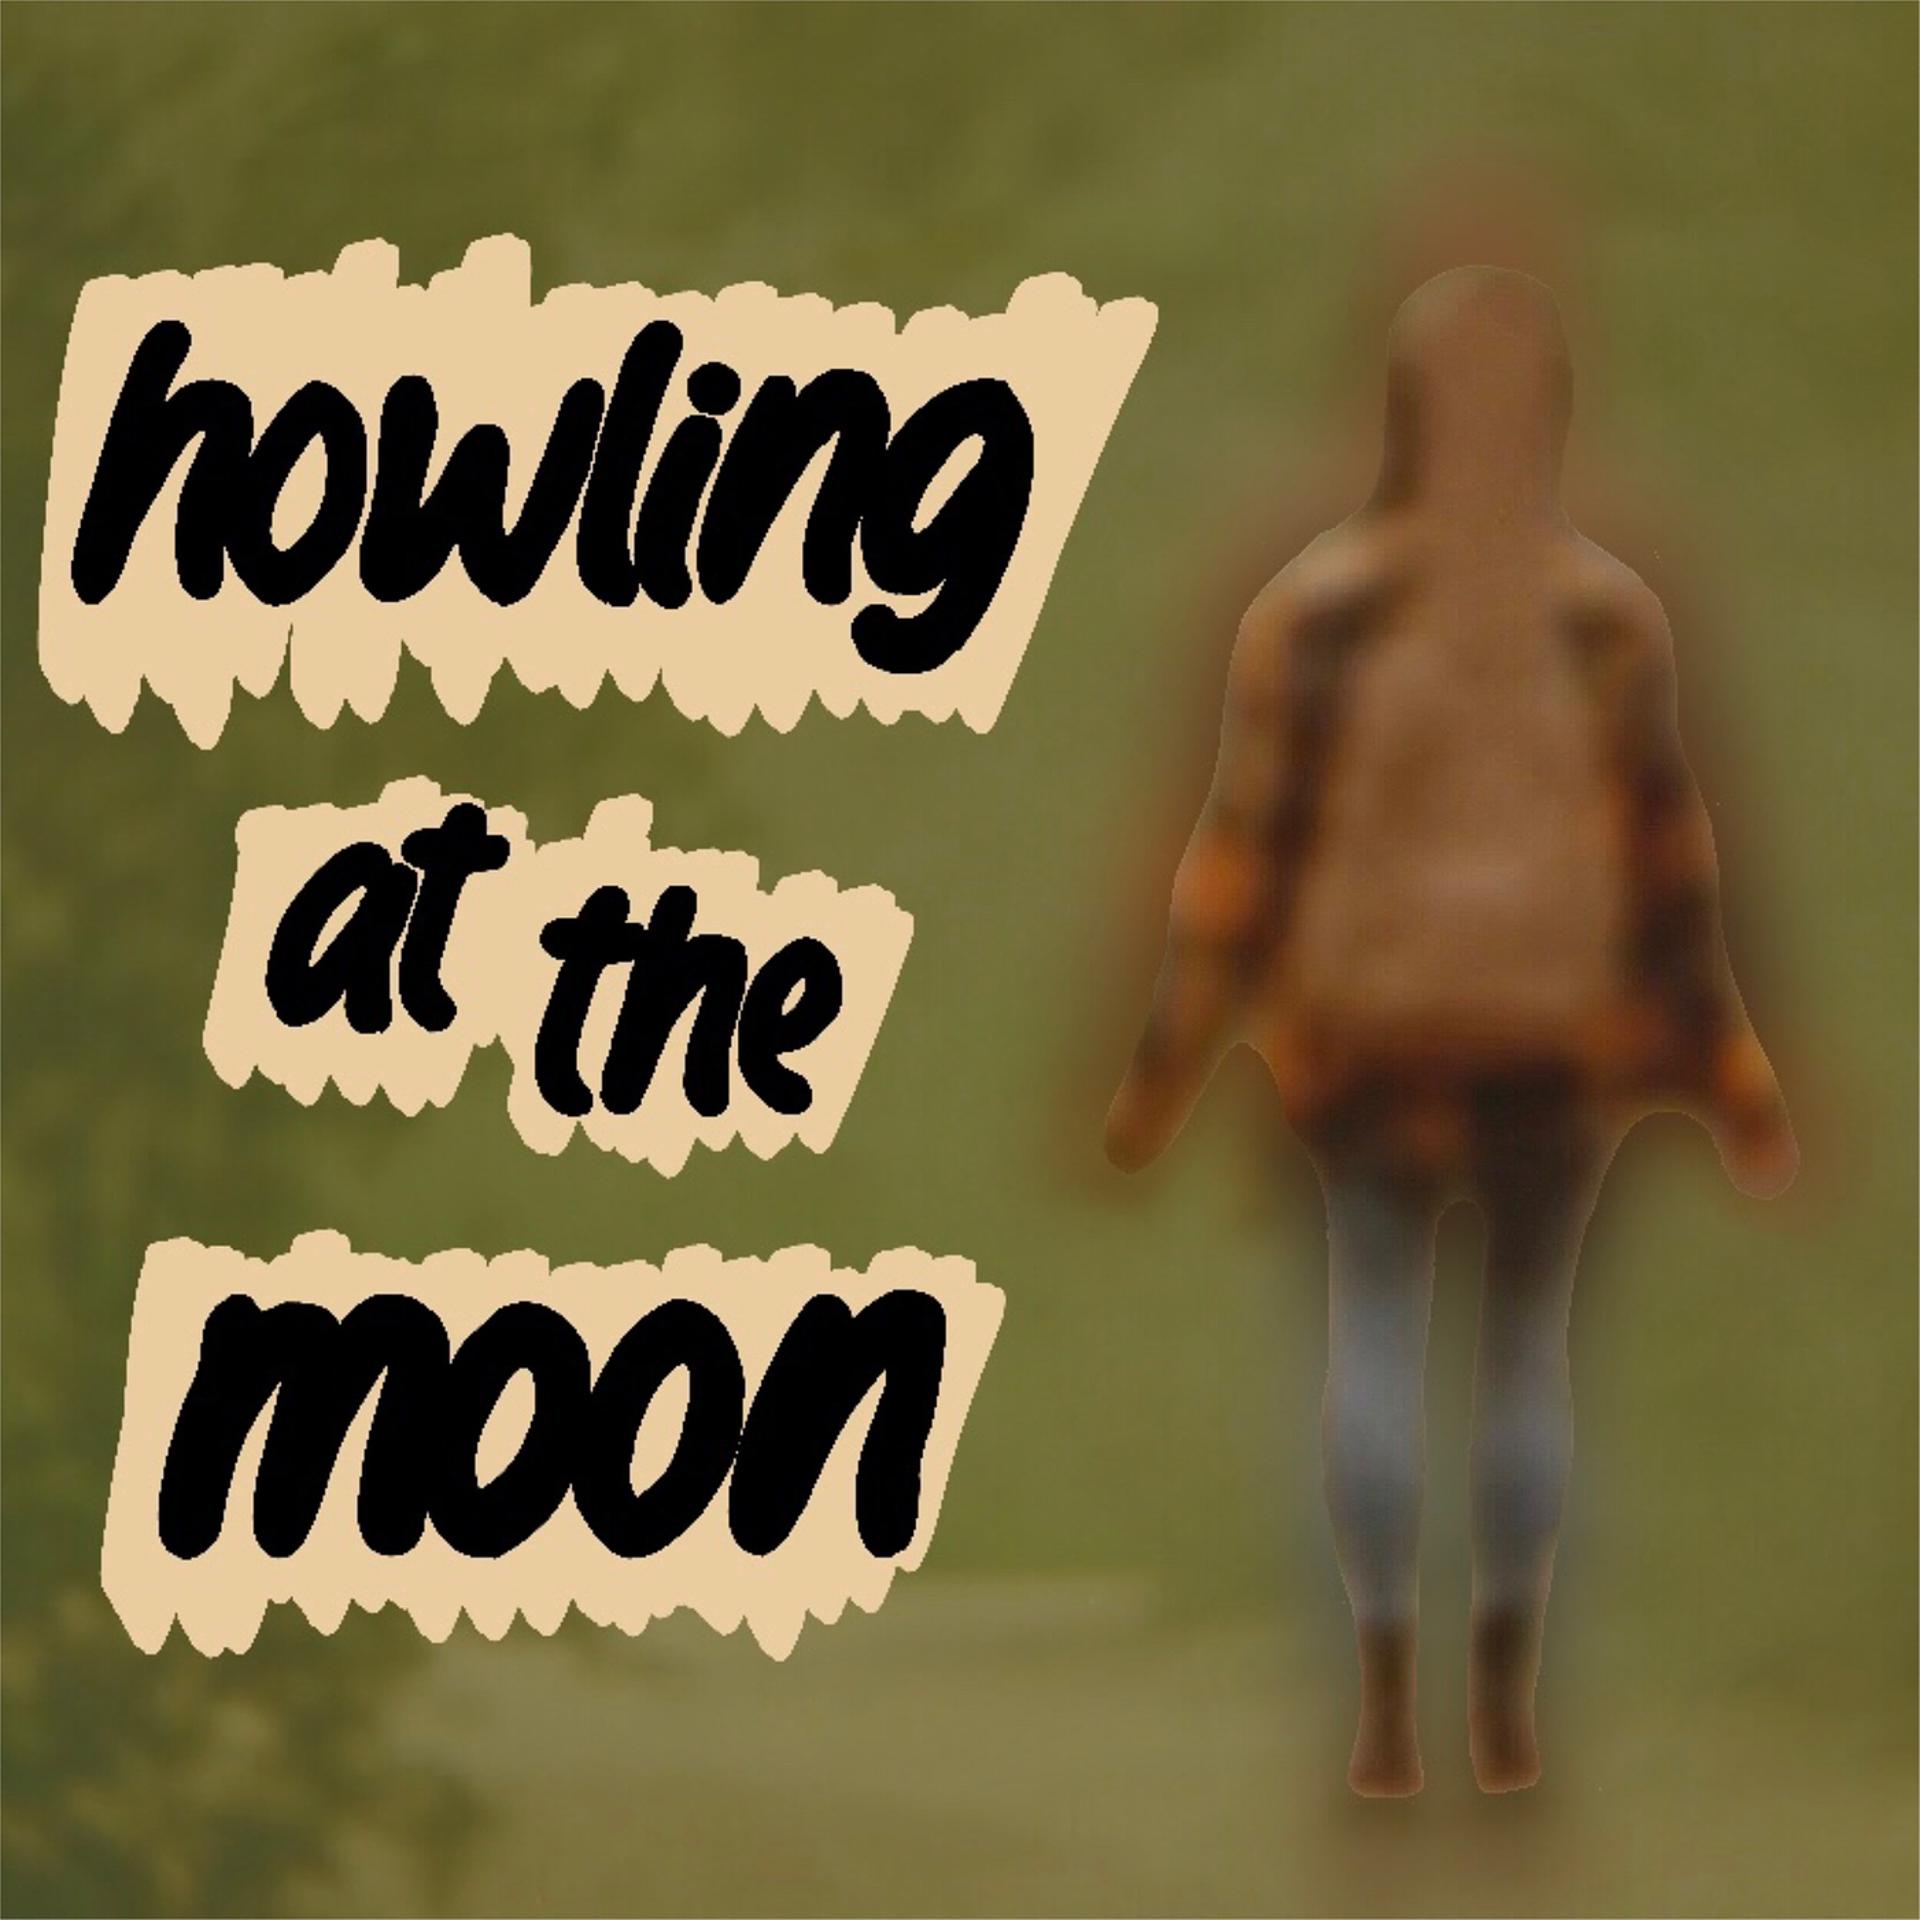 Постер альбома Howling at the Moon